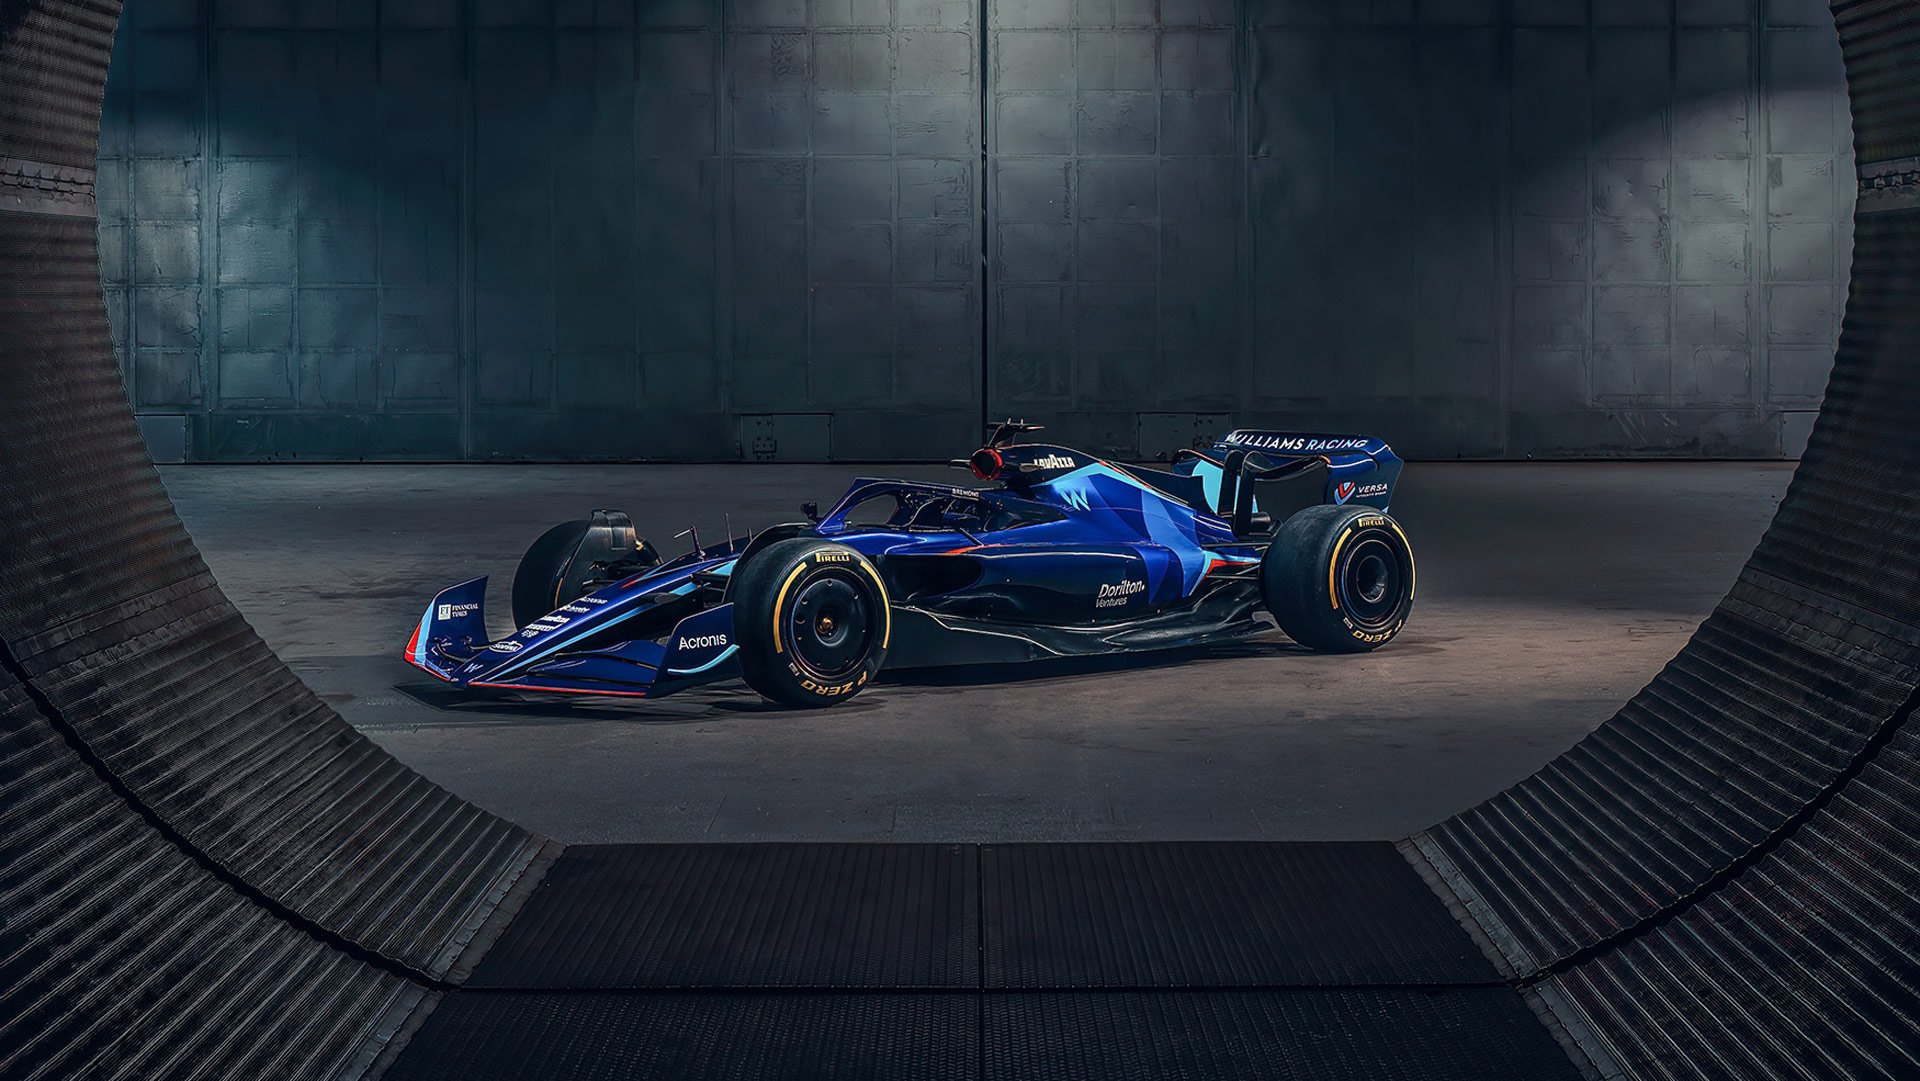 Williams has revealed the ‘season launch’ date for 2023